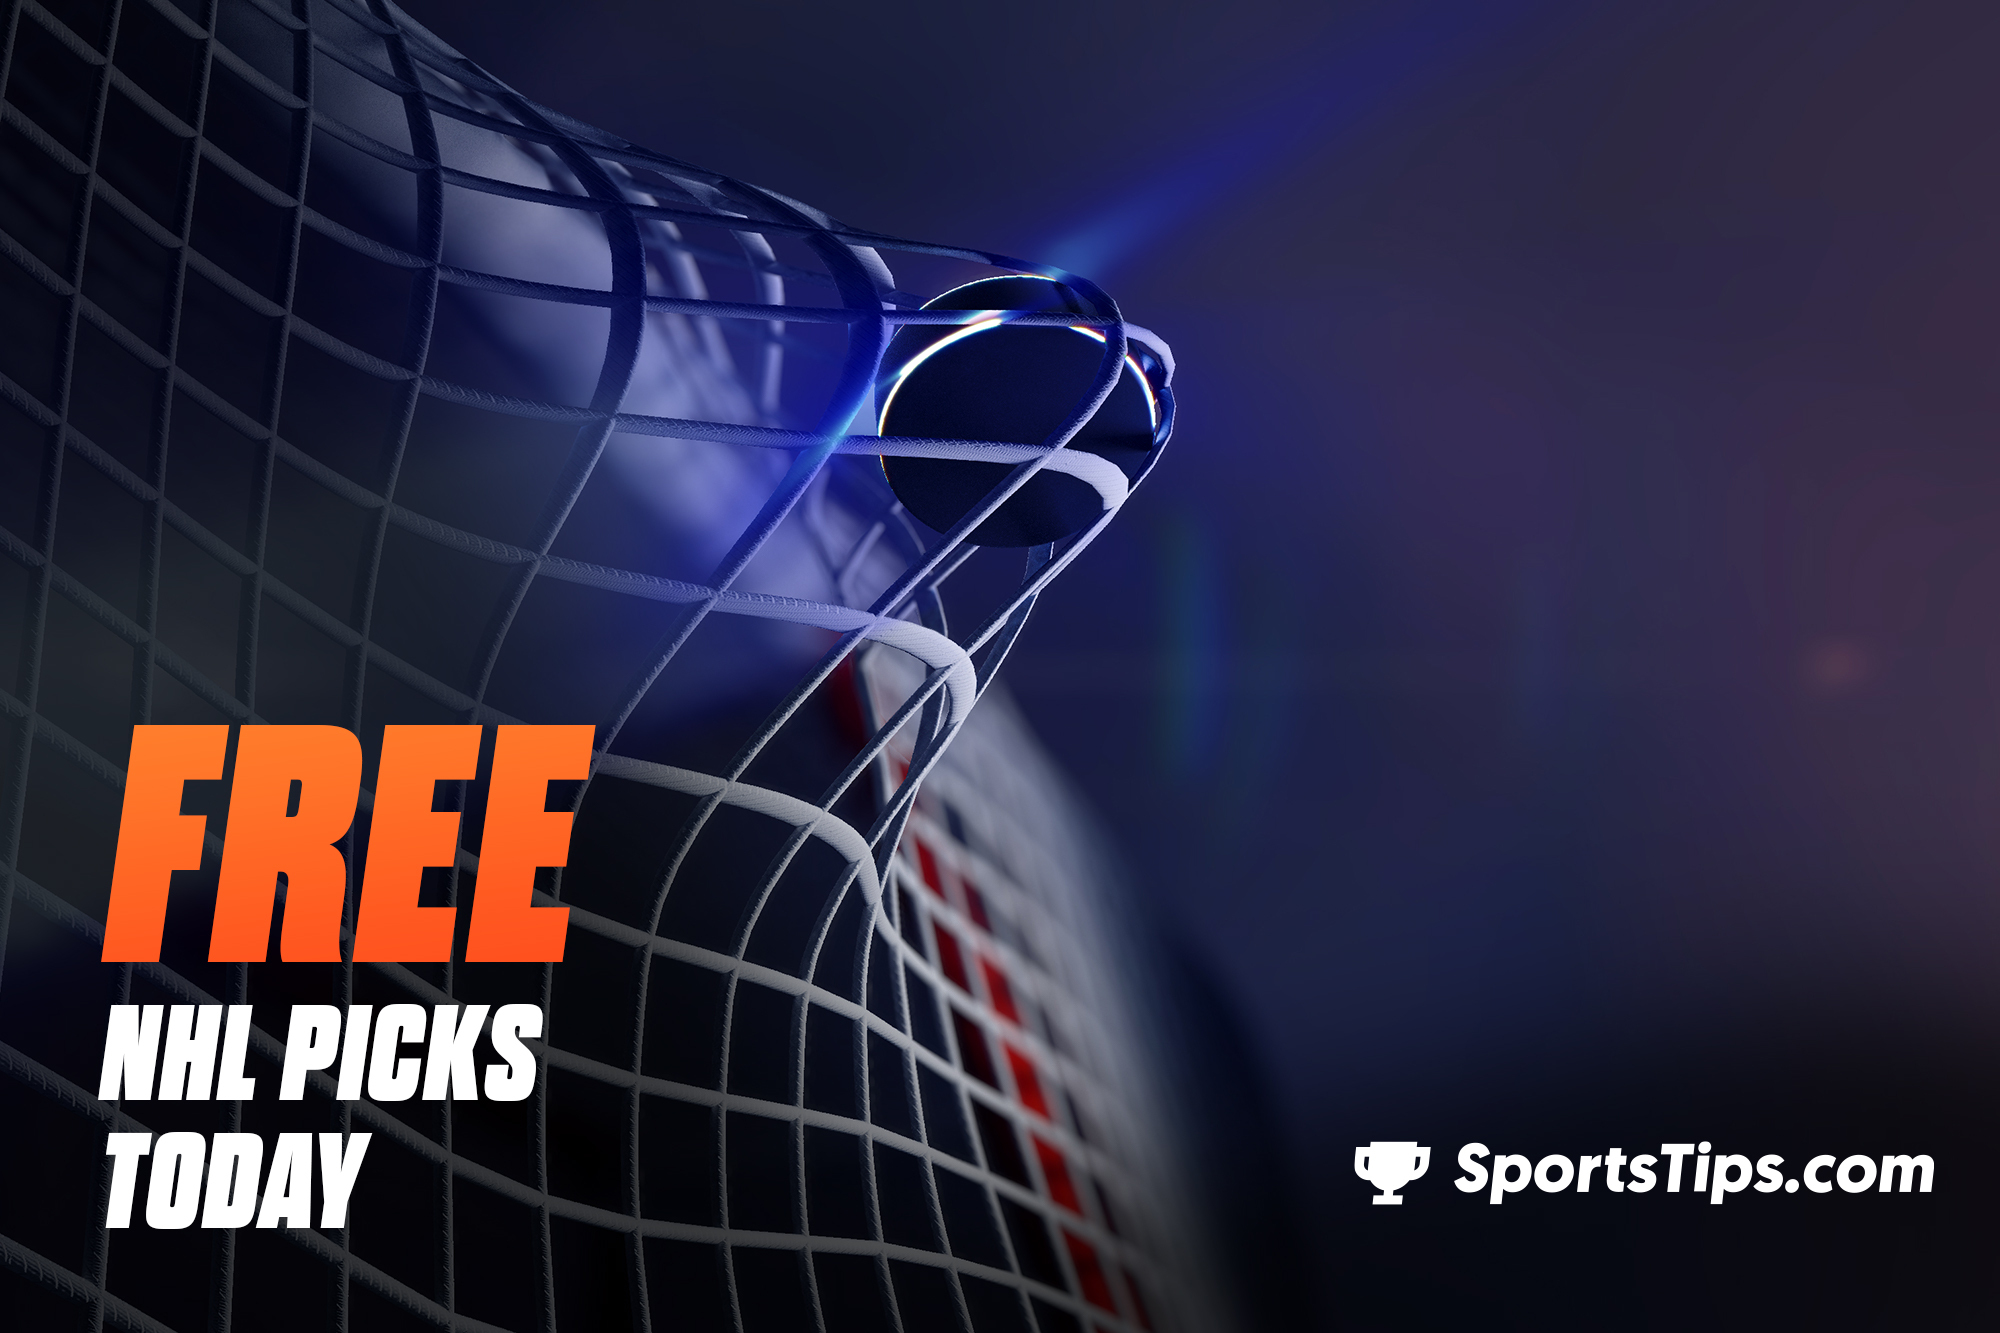 Free NHL Picks Today for Tuesday, January 4th, 2022